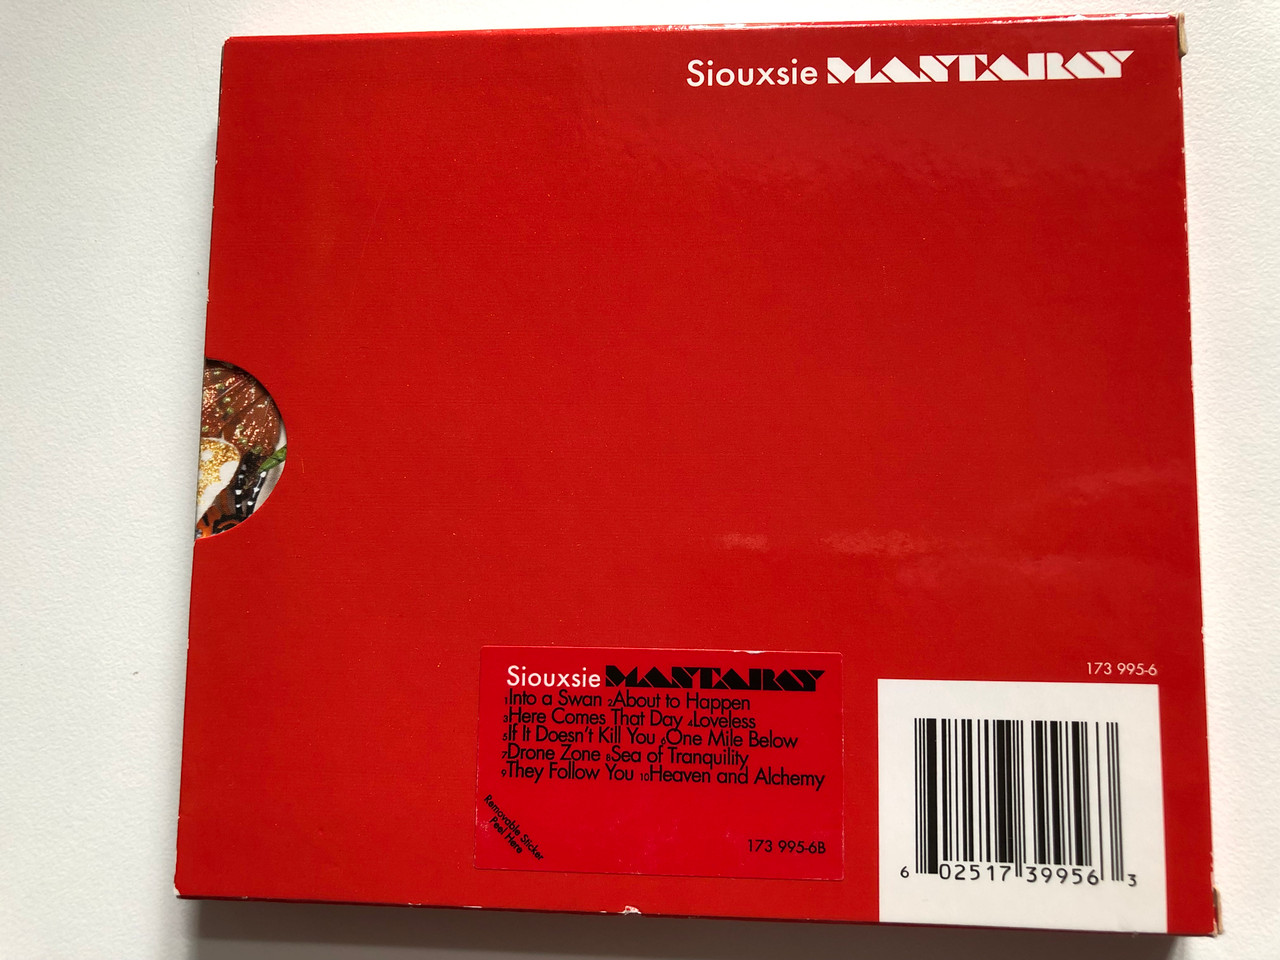 https://cdn10.bigcommerce.com/s-62bdpkt7pb/products/0/images/227999/Siouxsie_Mantaray_The_Brand_New_Album_including_the_single_Into_a_Swan_Special_Limited_Edition_CD_Contains_3_postcards_and_a_fold-out_poster_booklet_W14_Music_Audio_CD_2007_173_995__10677.1652862129.1280.1280.JPG?c=2&_gl=1*1e0fvn0*_ga*MjA2NTIxMjE2MC4xNTkwNTEyNTMy*_ga_WS2VZYPC6G*MTY1Mjg1NTcwMS40MDEuMS4xNjUyODYxOTU3LjQx